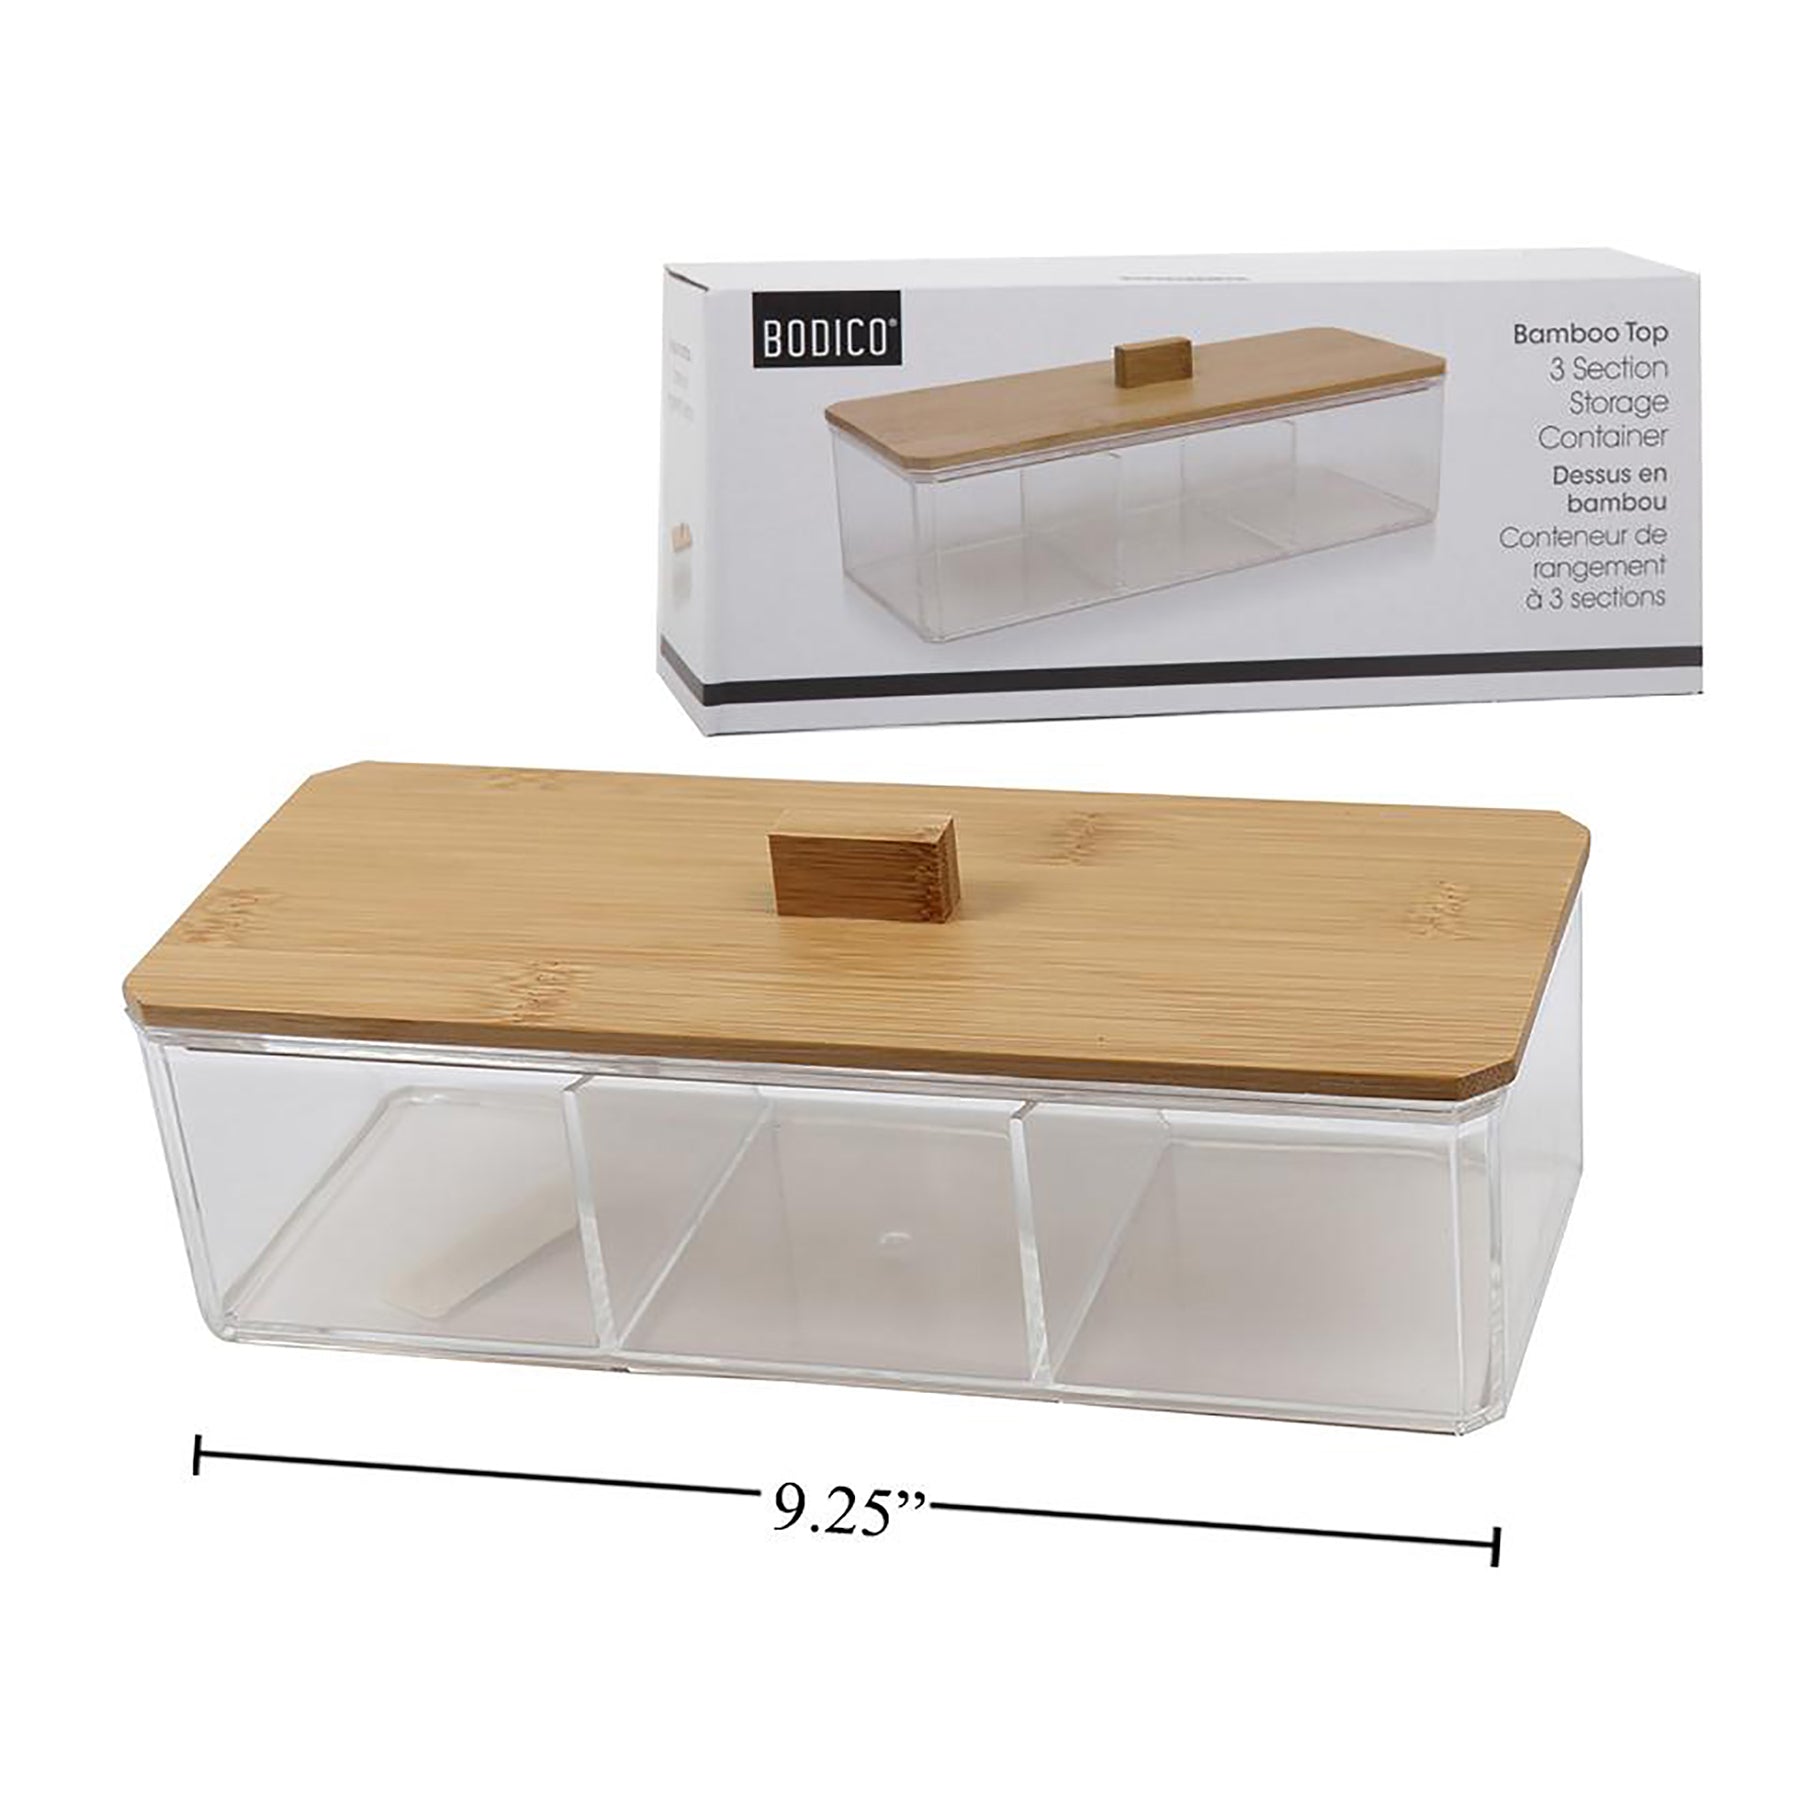 Bodico Container 3 Sections  Acrylic with Bamboo Top 9.3x43.7x3.3in